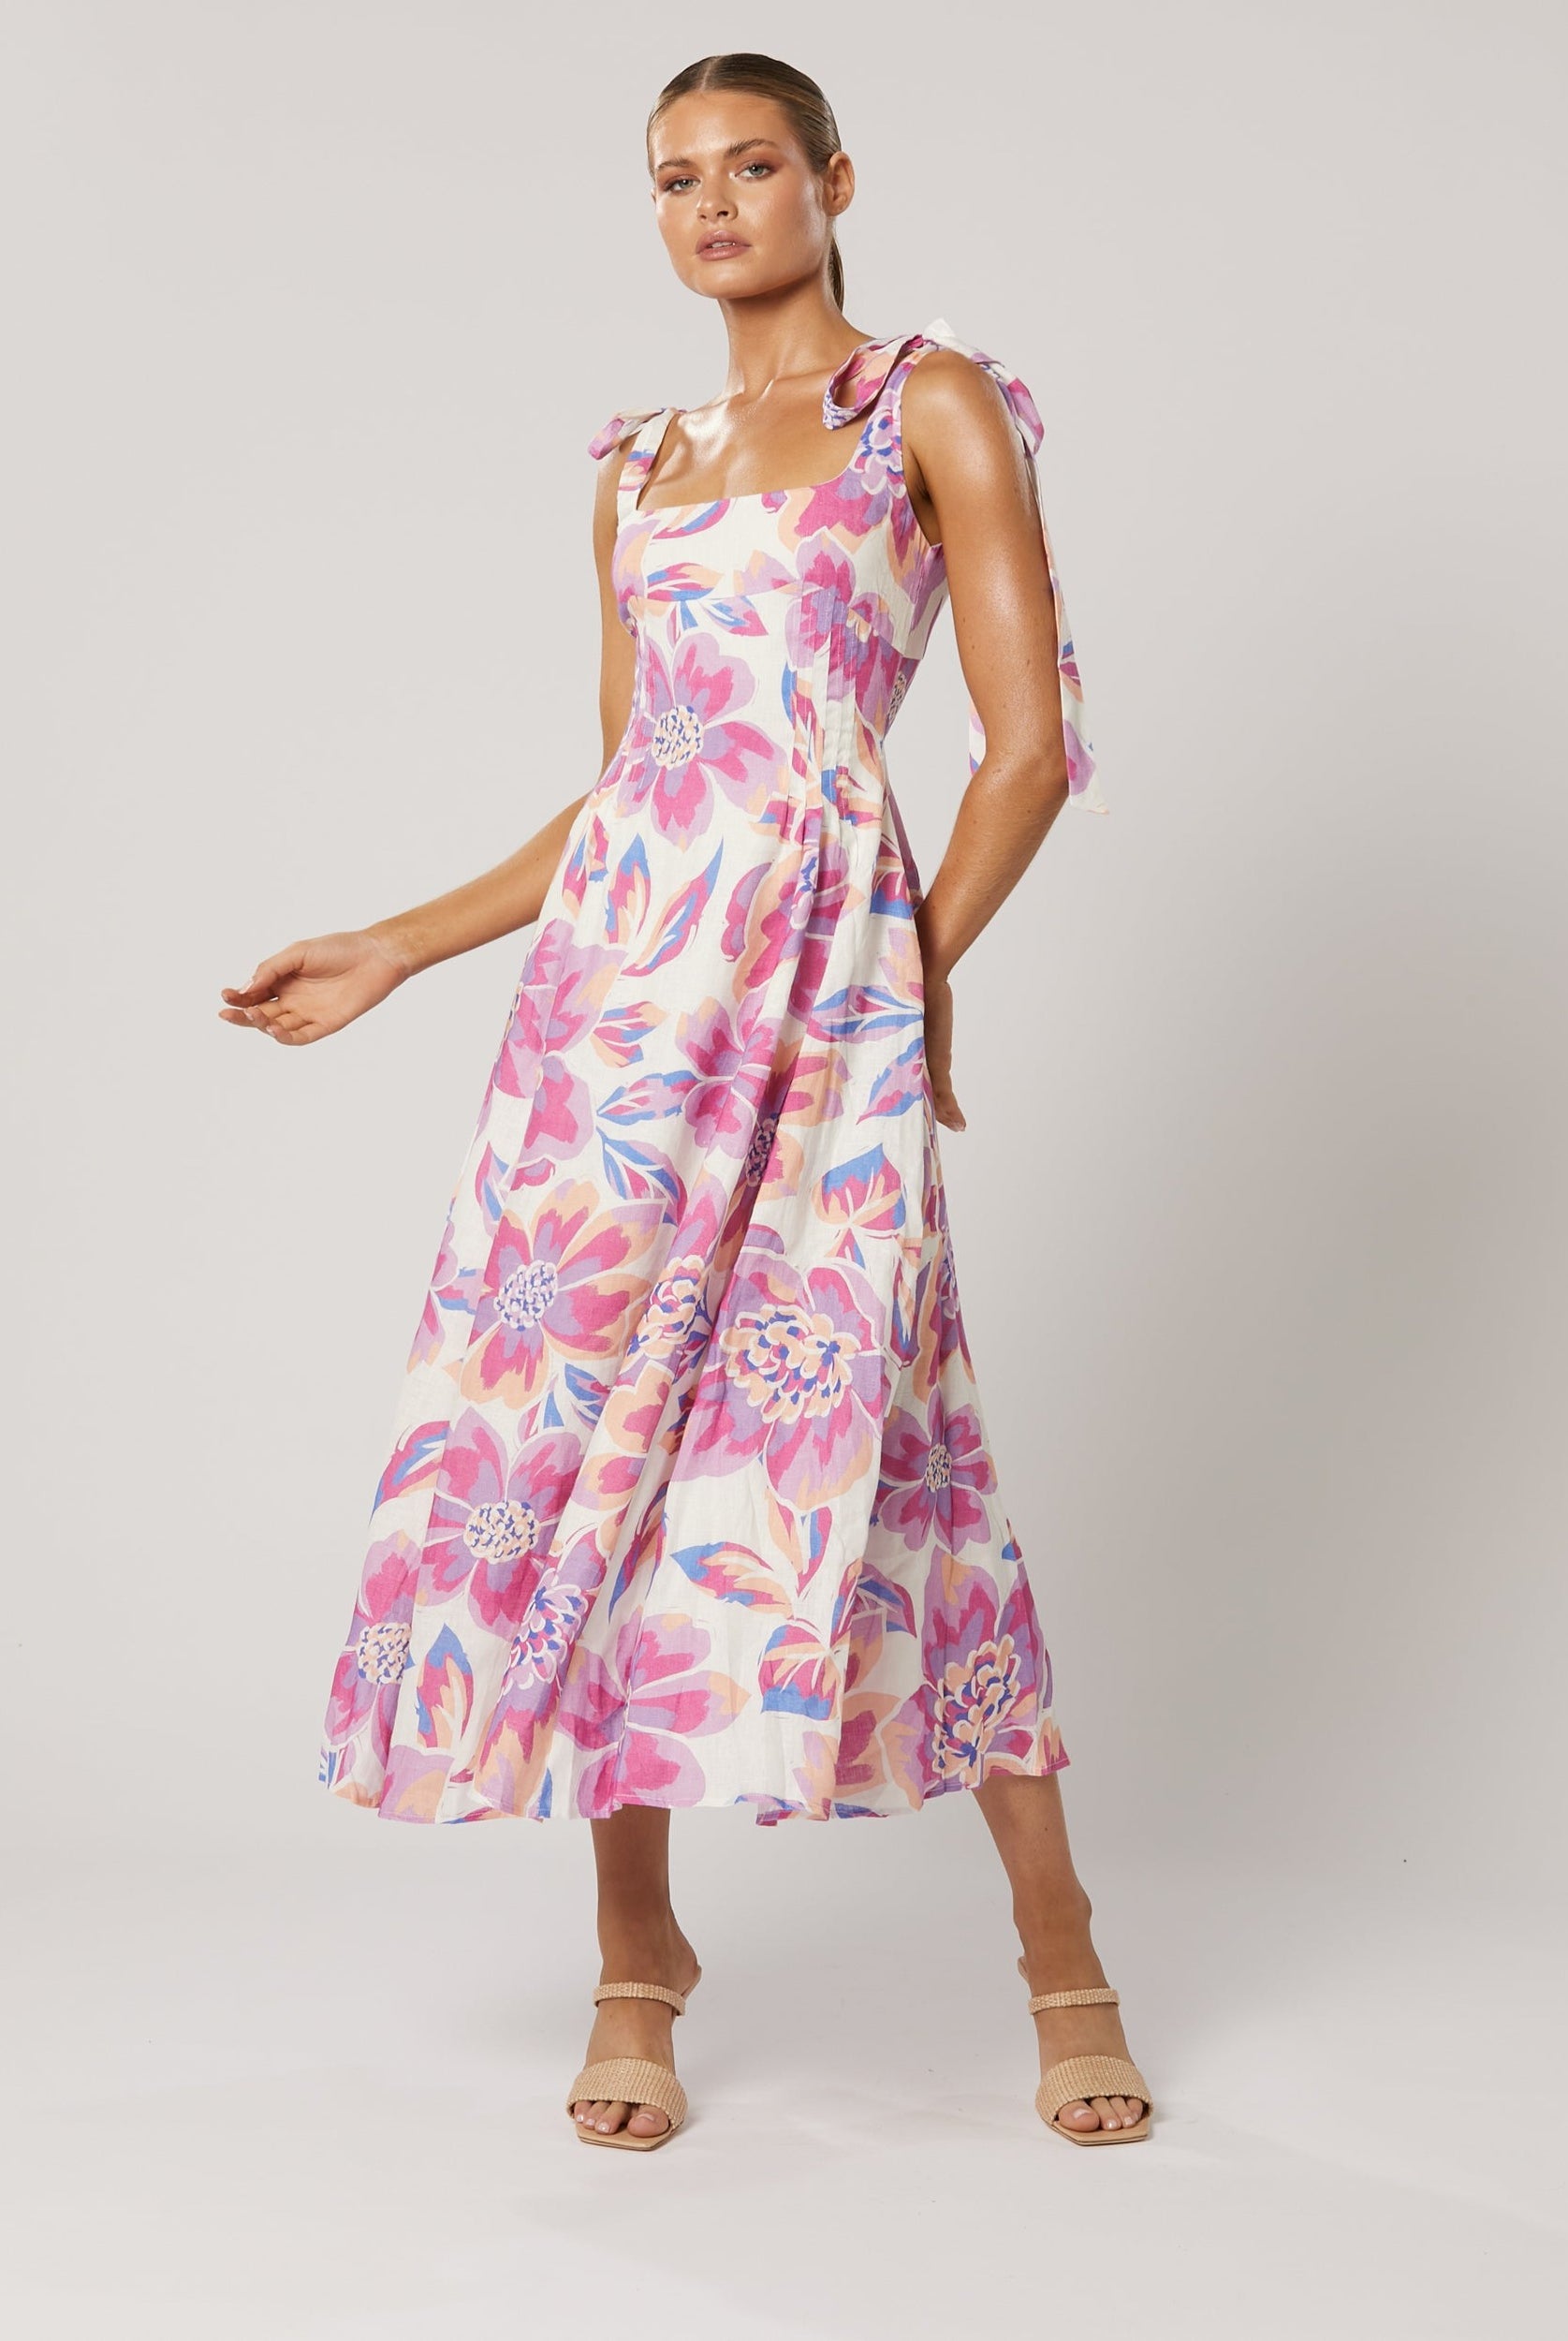 Model wearing the Audra Midi Dress - pink floral print midi with tie straps